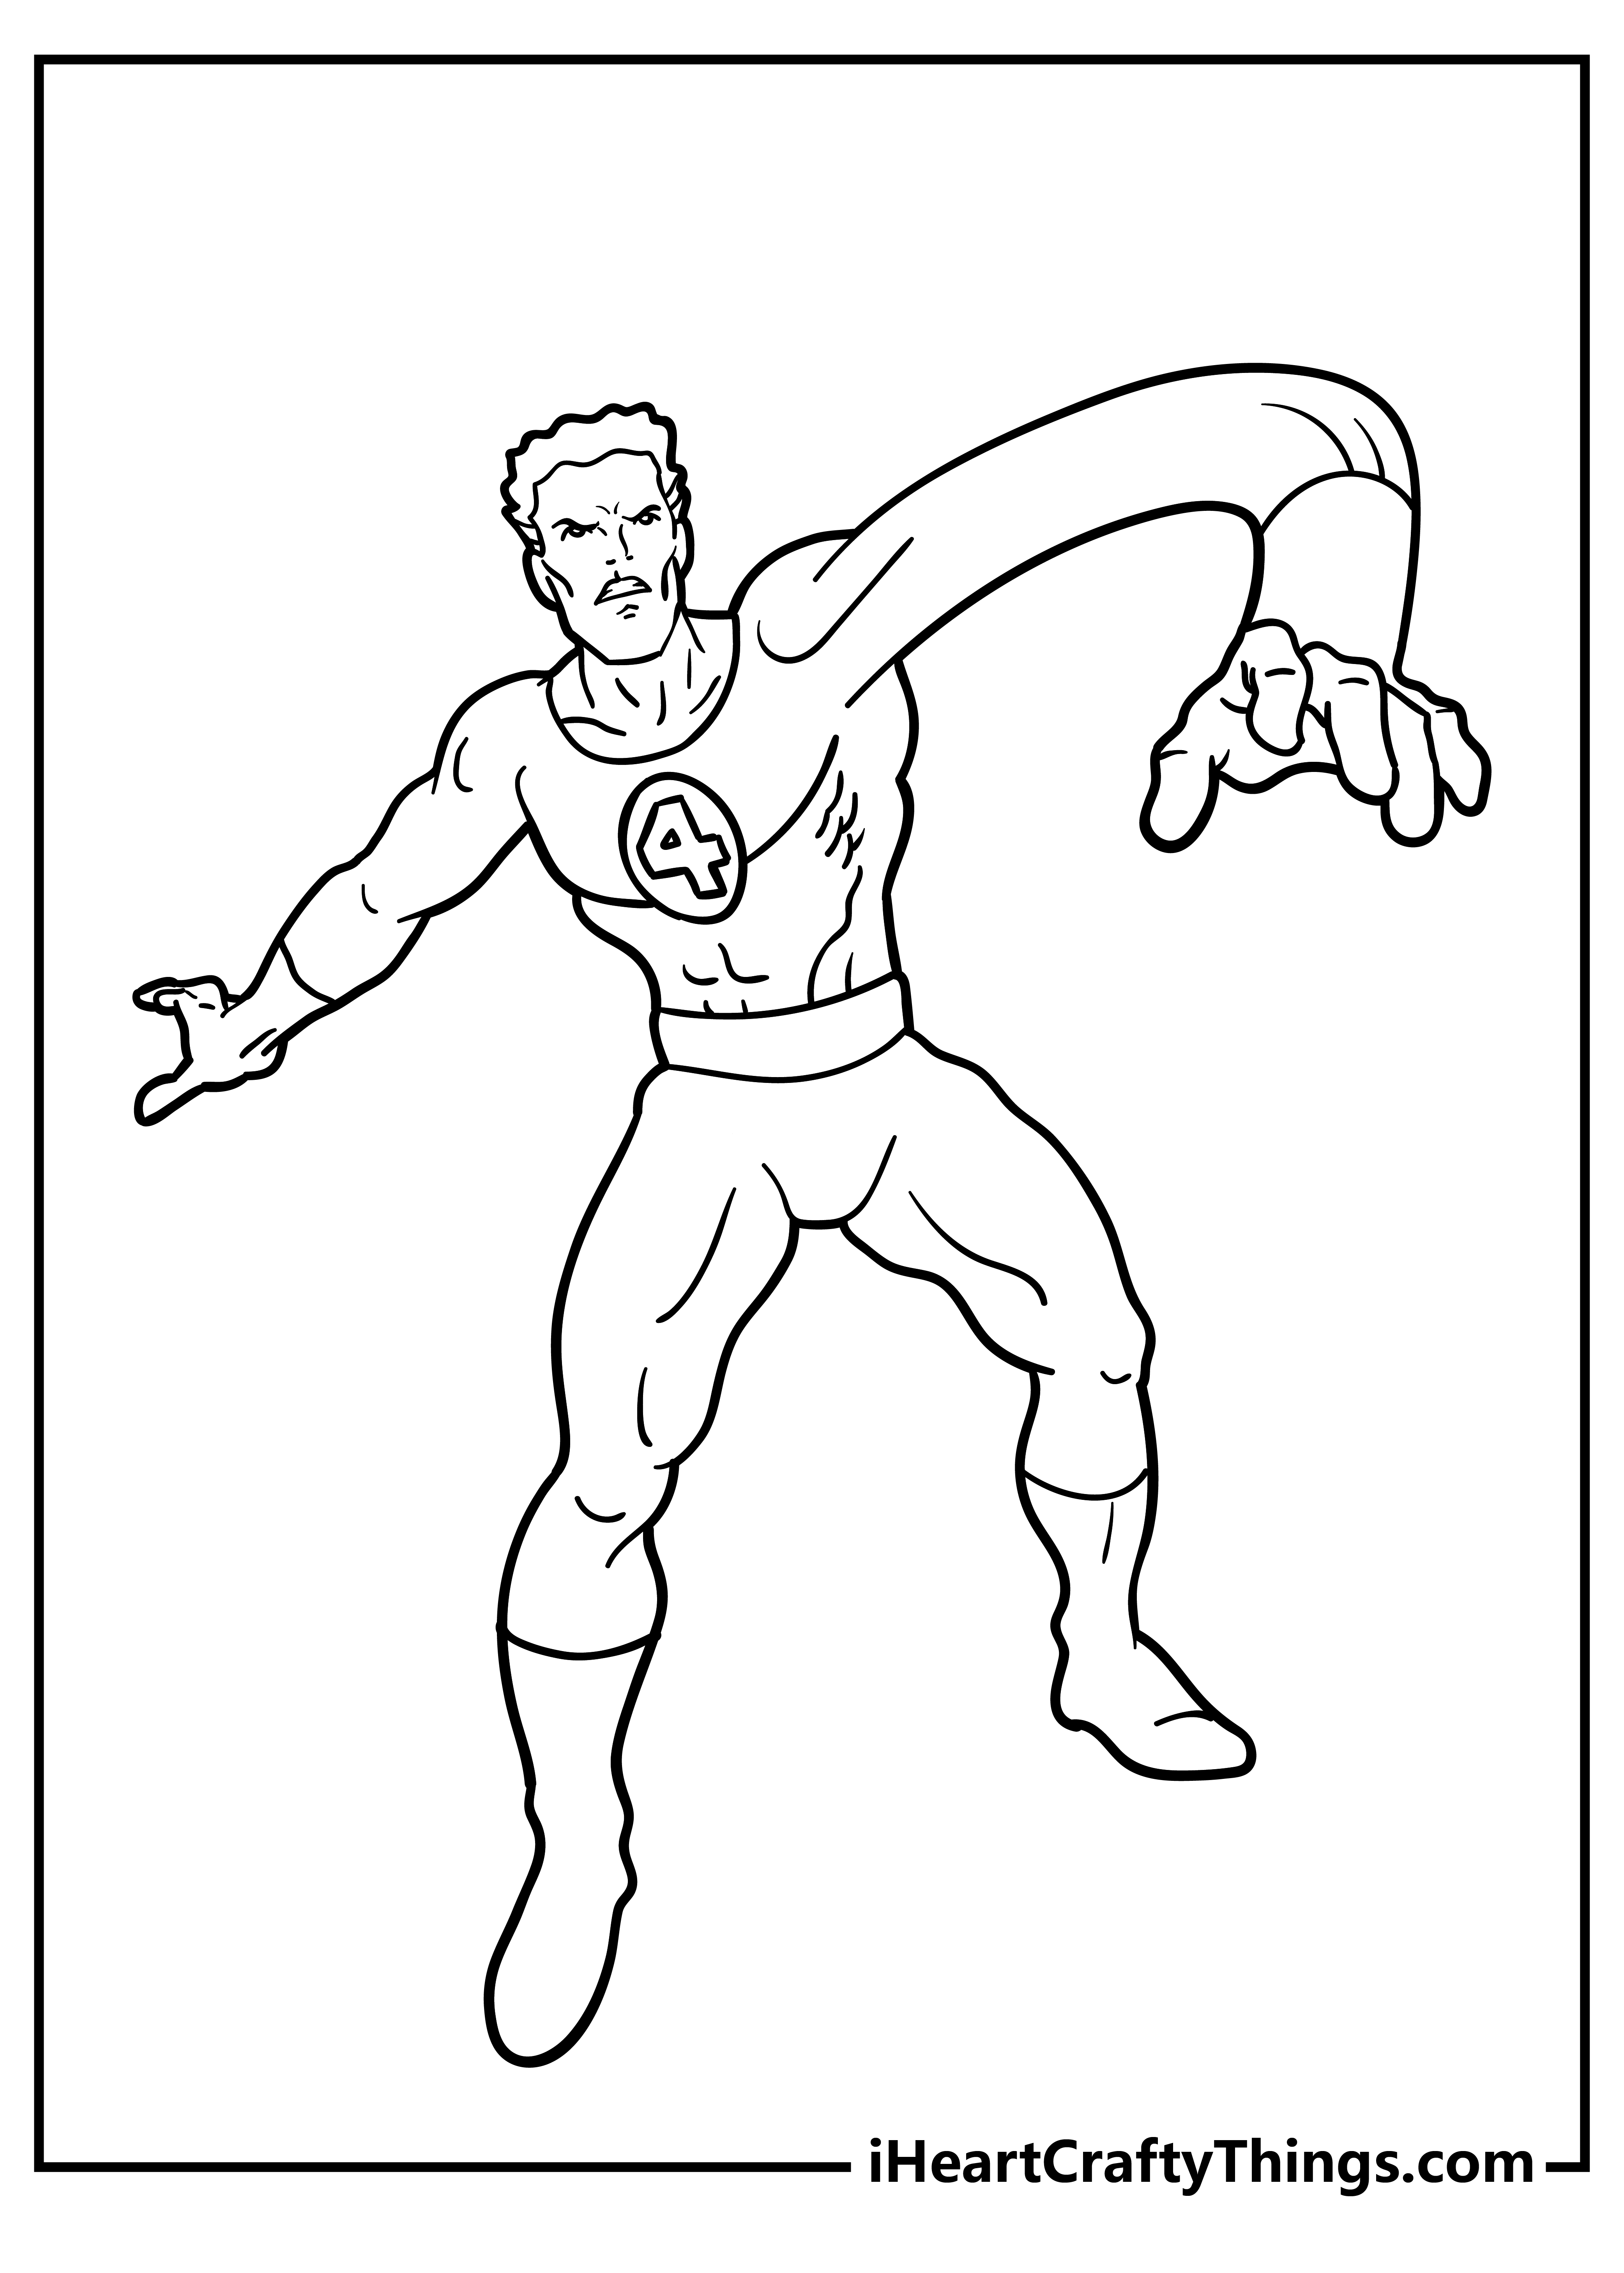 Superheroes Easy Coloring Pages